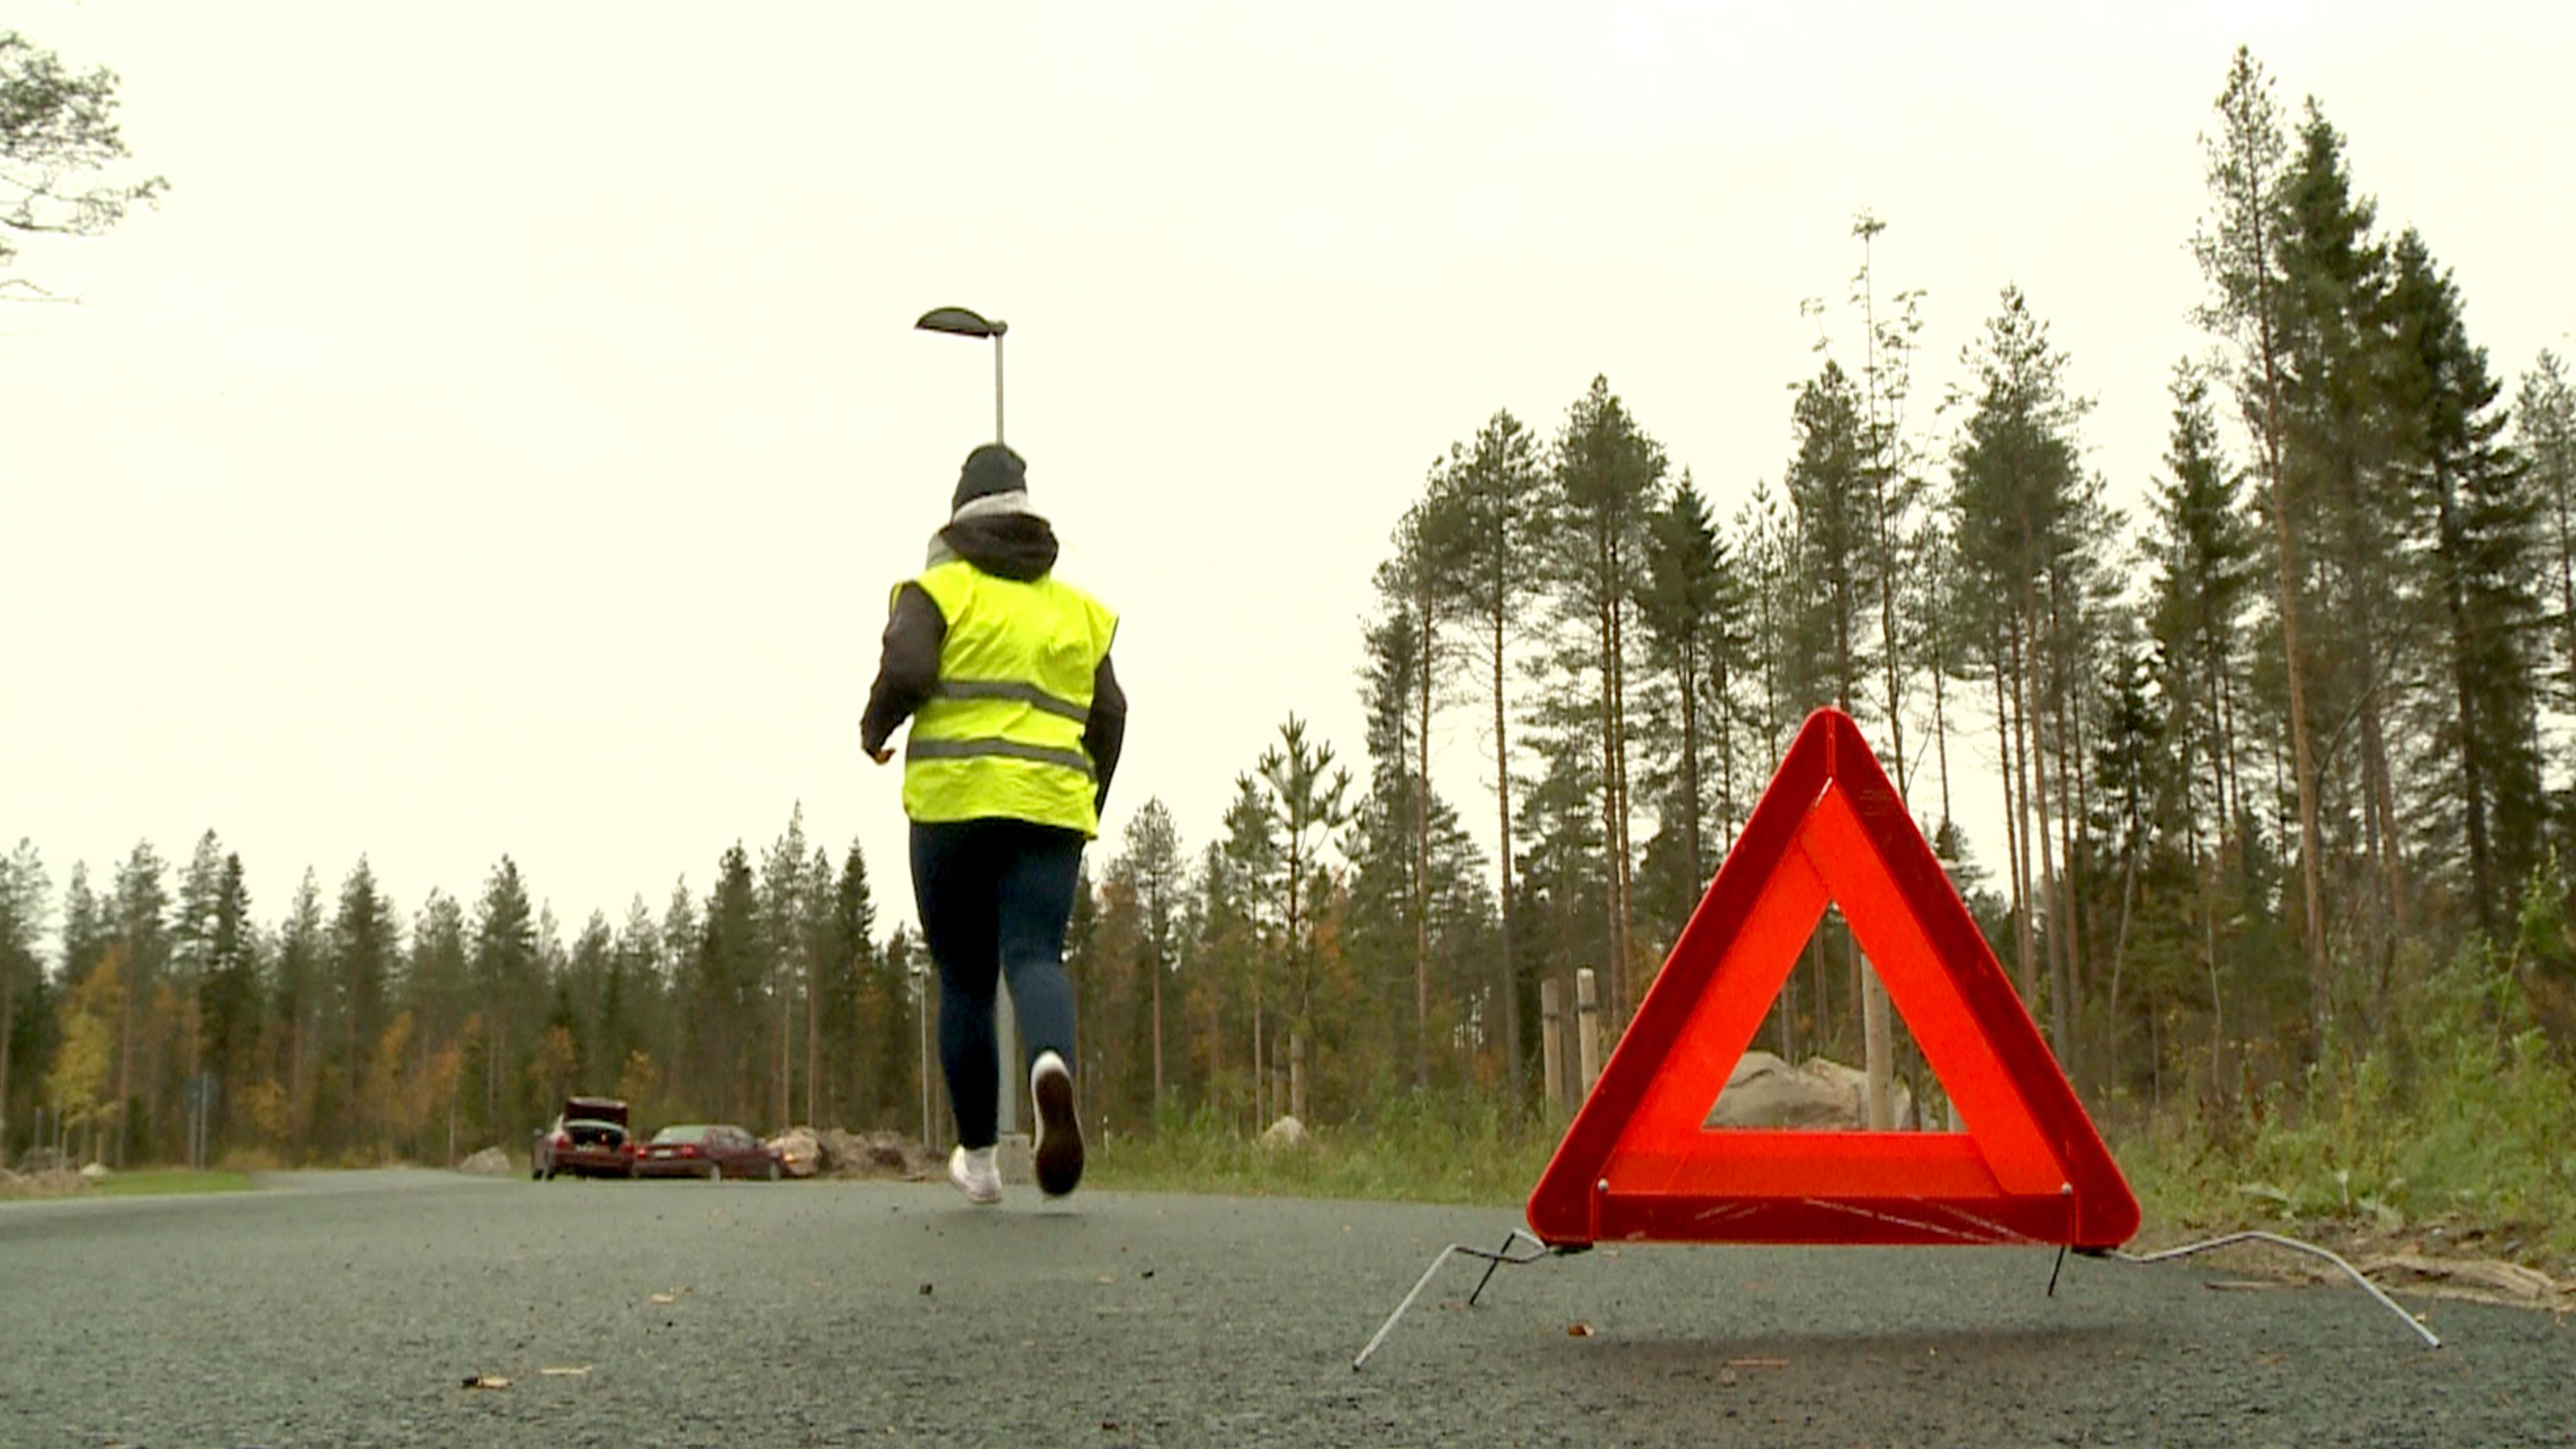 A helper has placed a warning triangle on the road side to prevent any further accidents. The helper is also wearing a high-visibility vest.